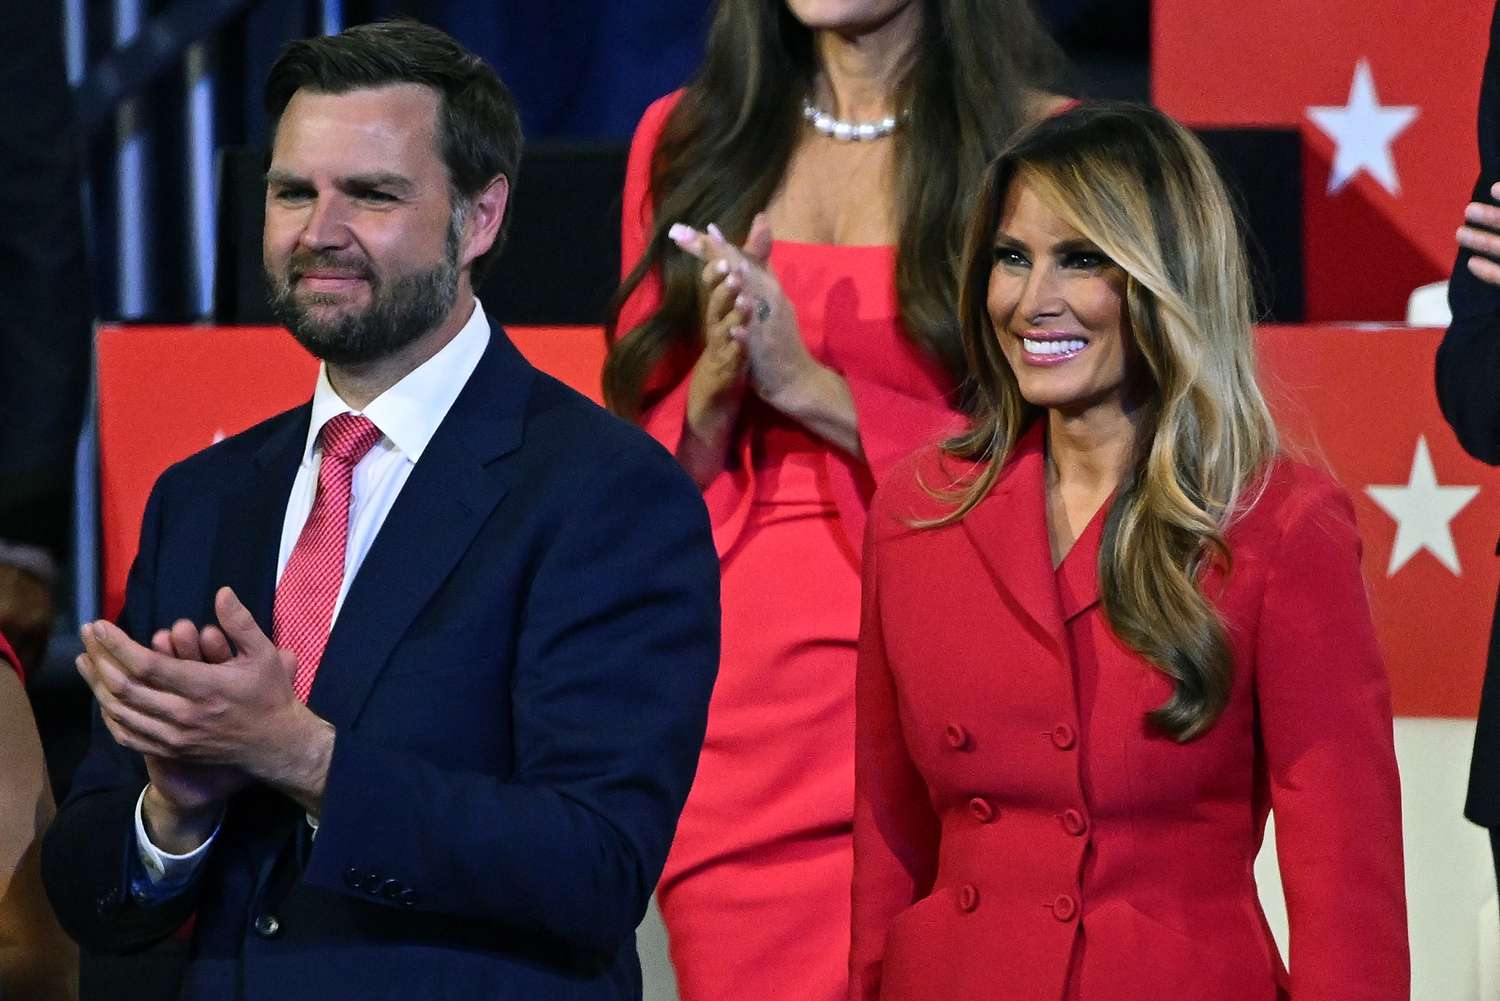 Melania Trump Shows Up on Final Night of Republican National Convention After Missing First Three Days